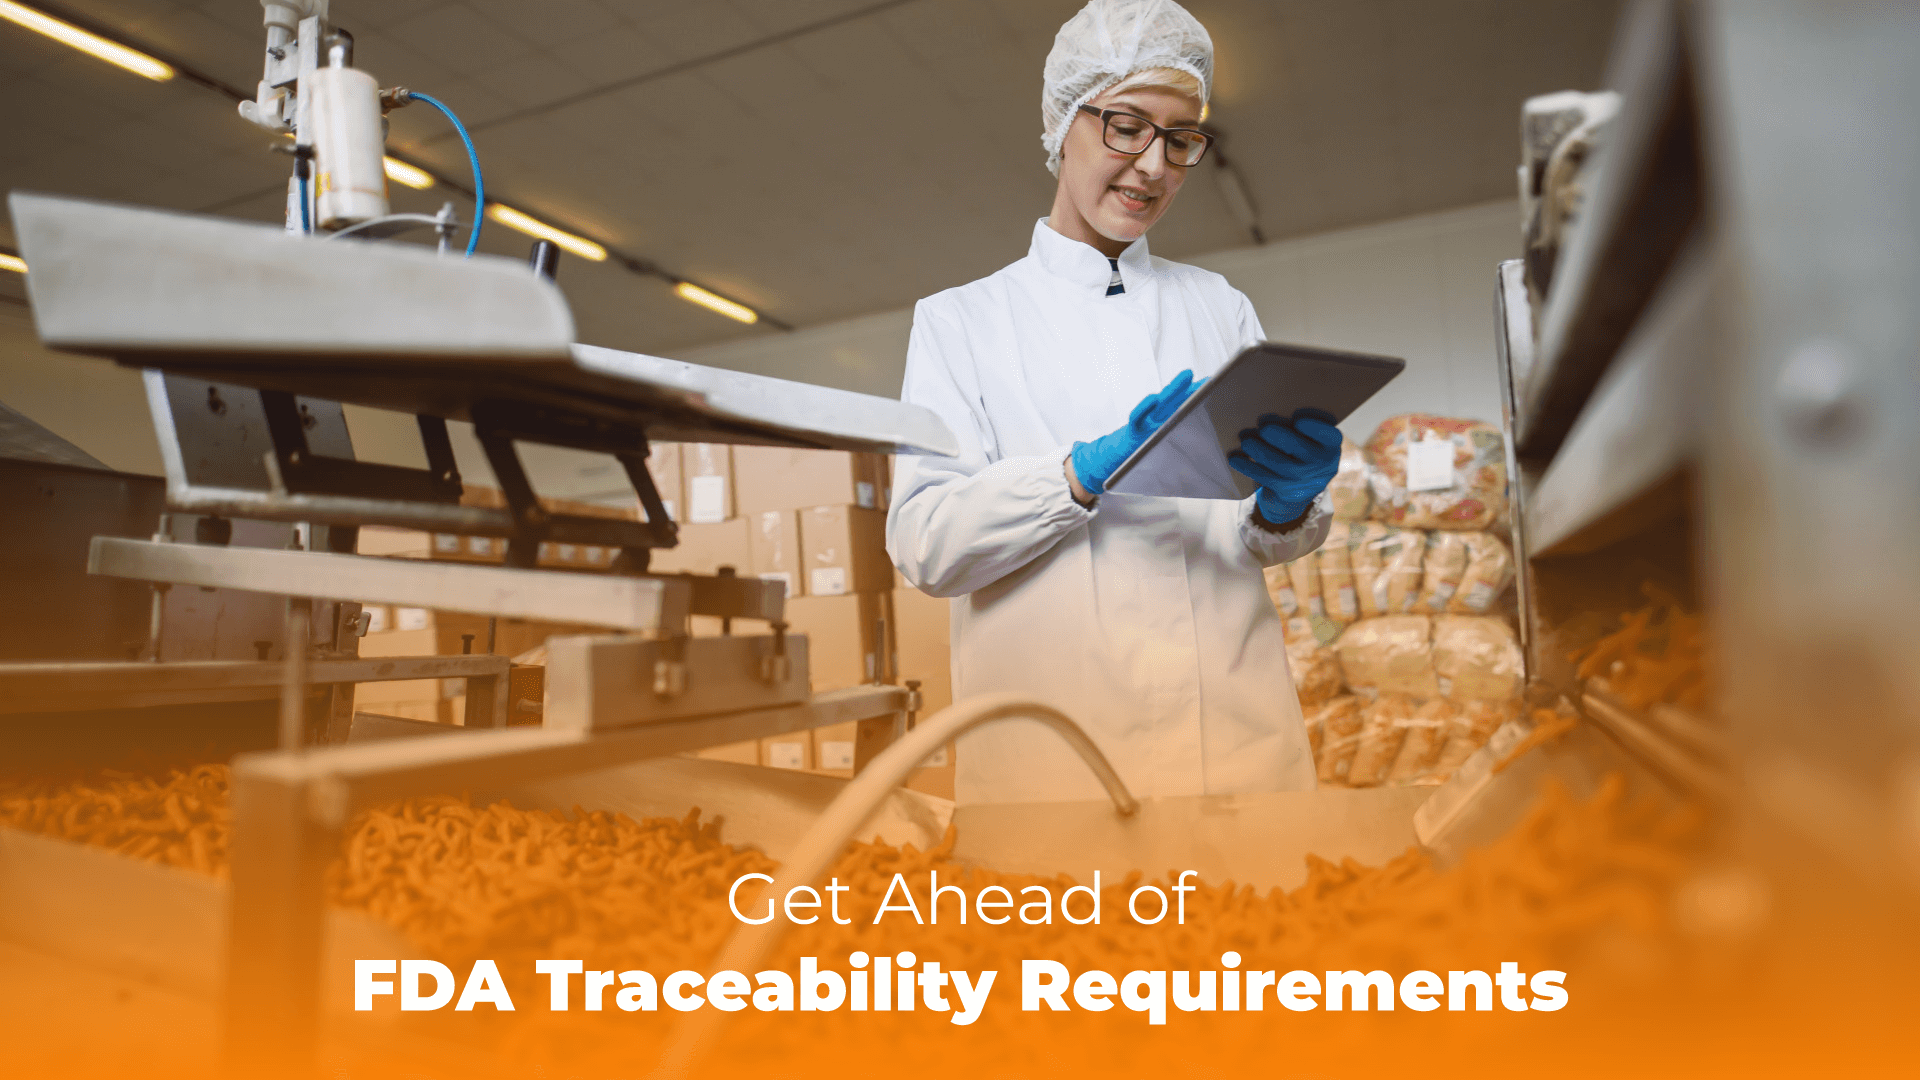 Get Ahead of FDA Traceability Requirements